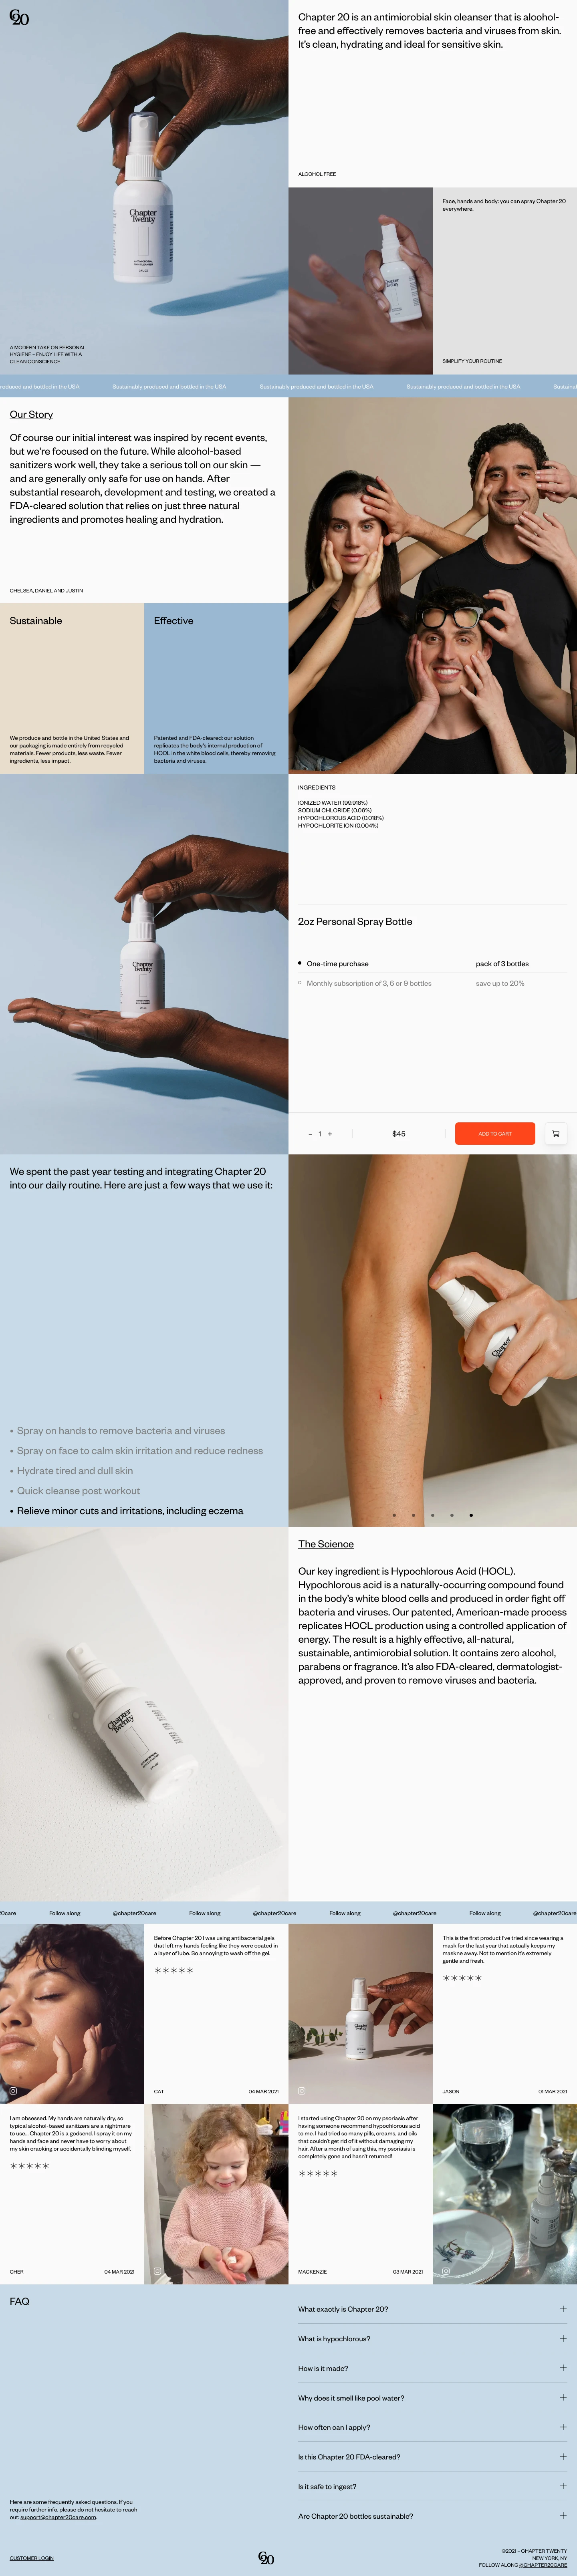 Chapter20 Landing Page Example: Chapter 20 is an antimicrobial skin cleanser that is alcohol-free and effectively removes bacteria and viruses from skin. It’s clean, hydrating and ideal for sensitive skin.